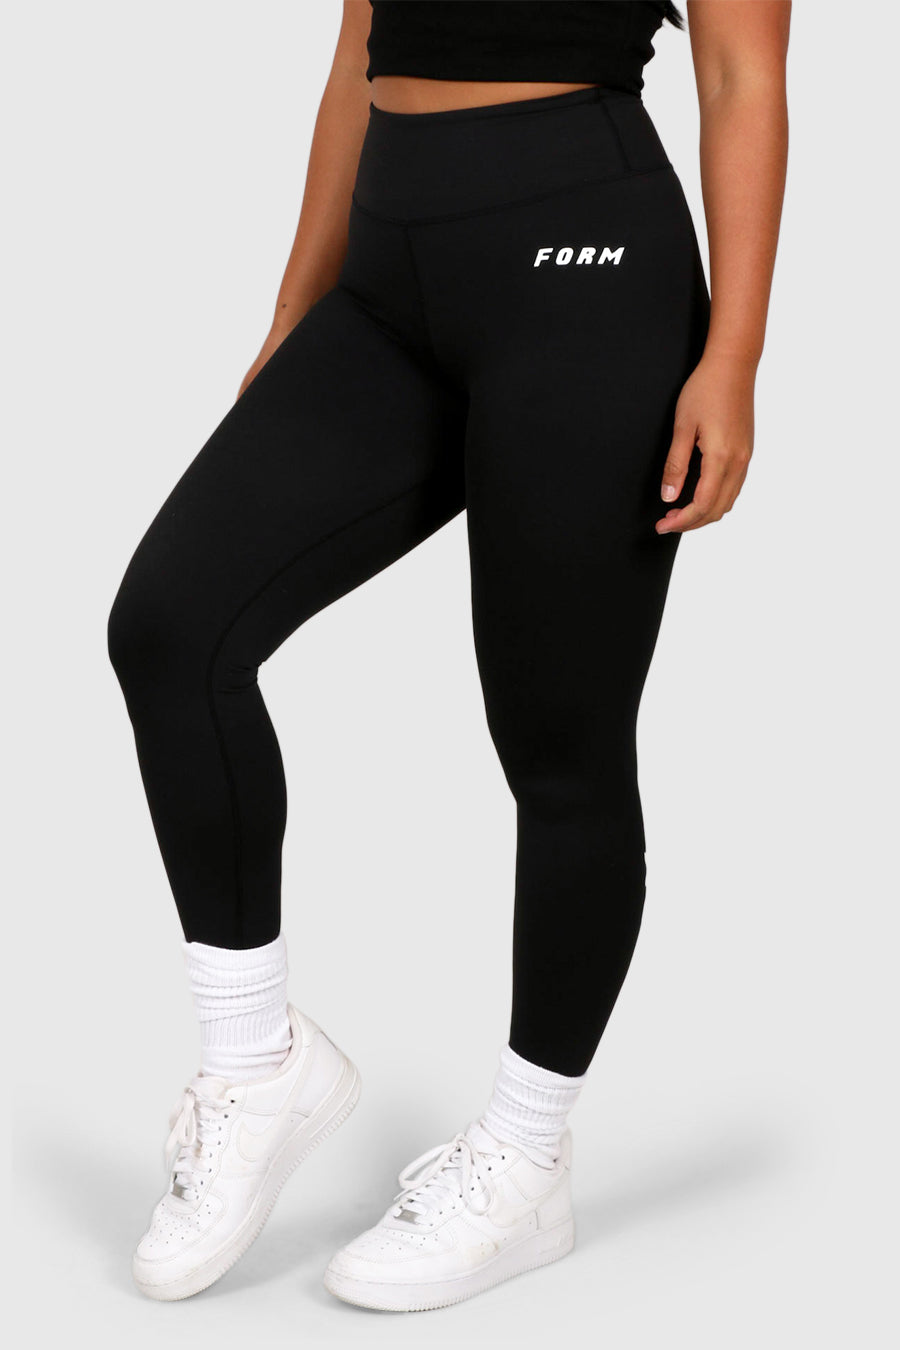 FORM BASE TIGHT 7/8 BLACK – FAYT The Label